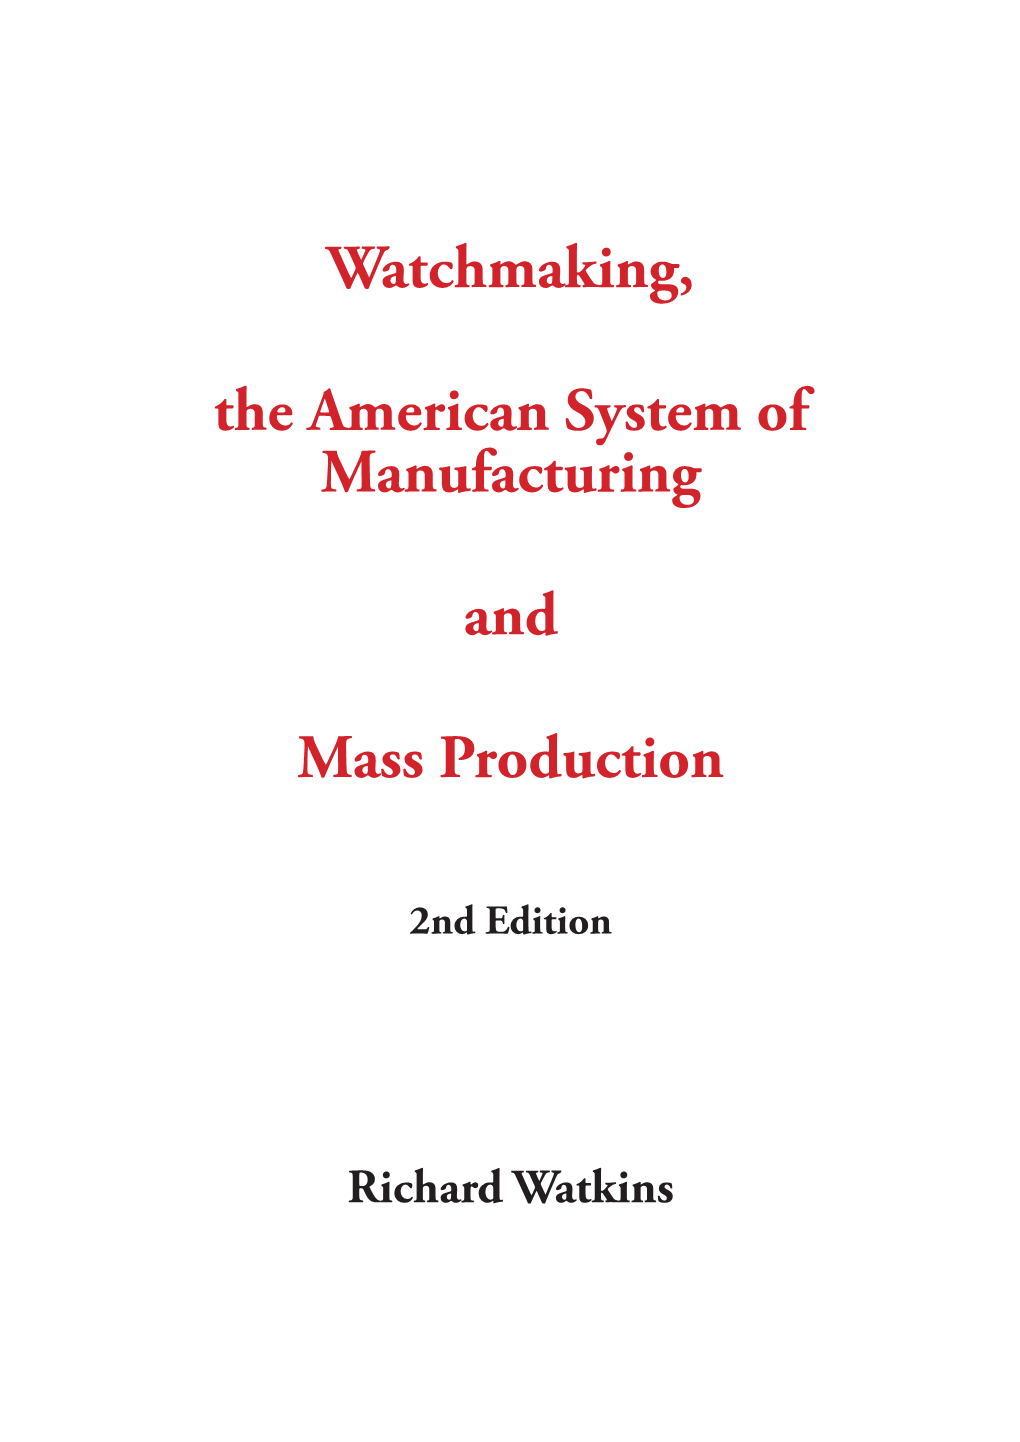 Watchmaking, the American System of Manufacturing and Mass Production